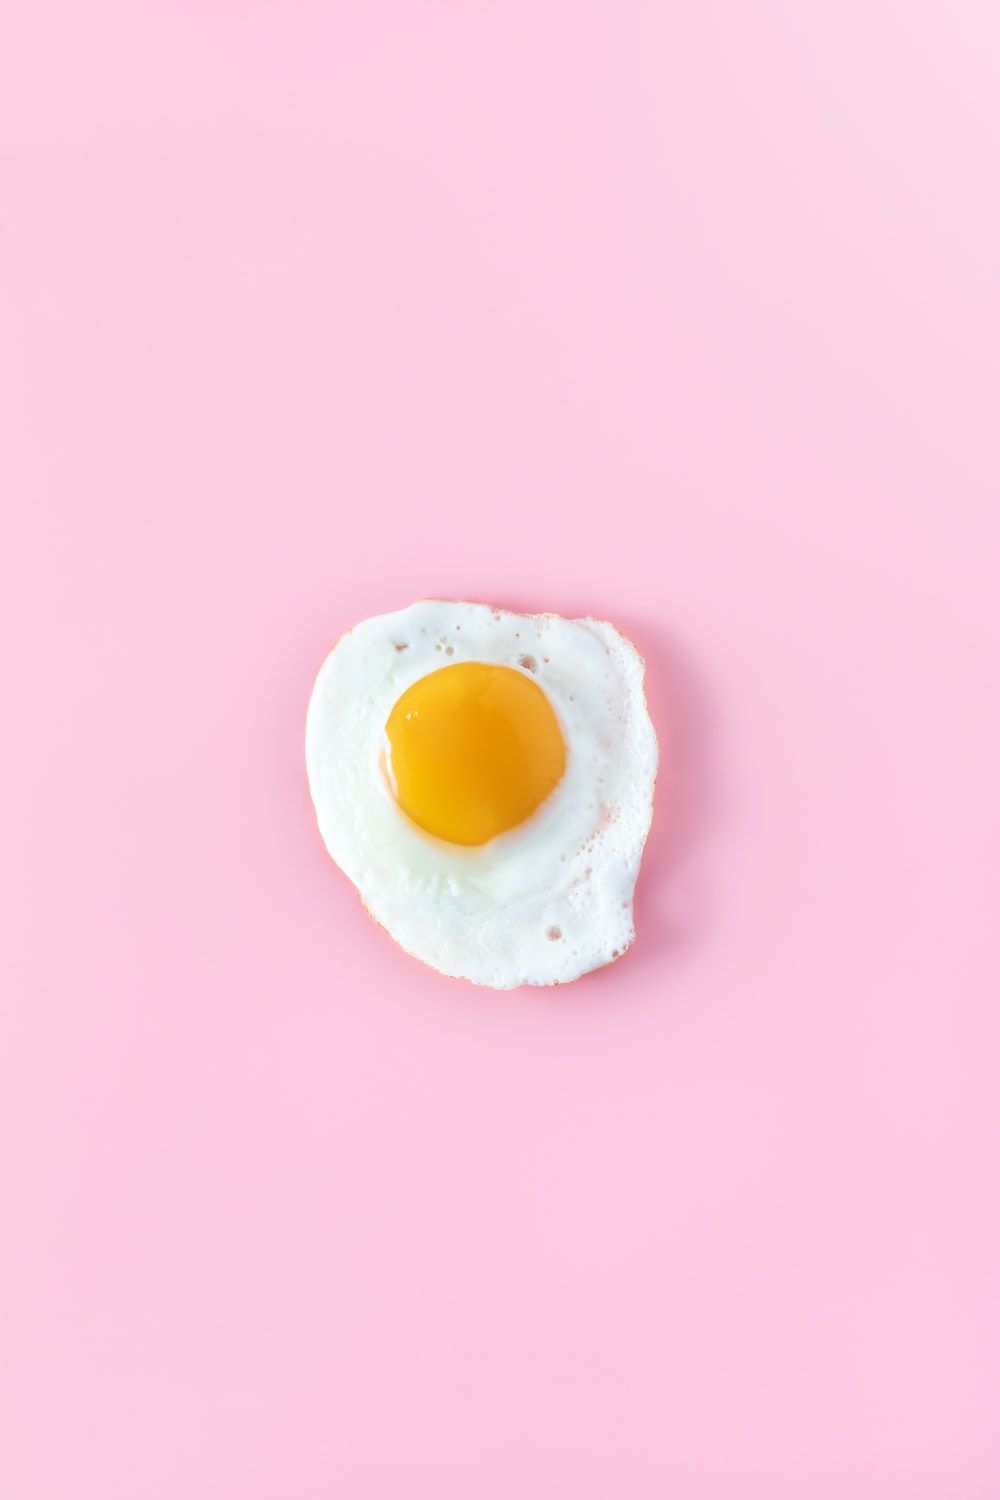 A single egg on top of pink background - Egg